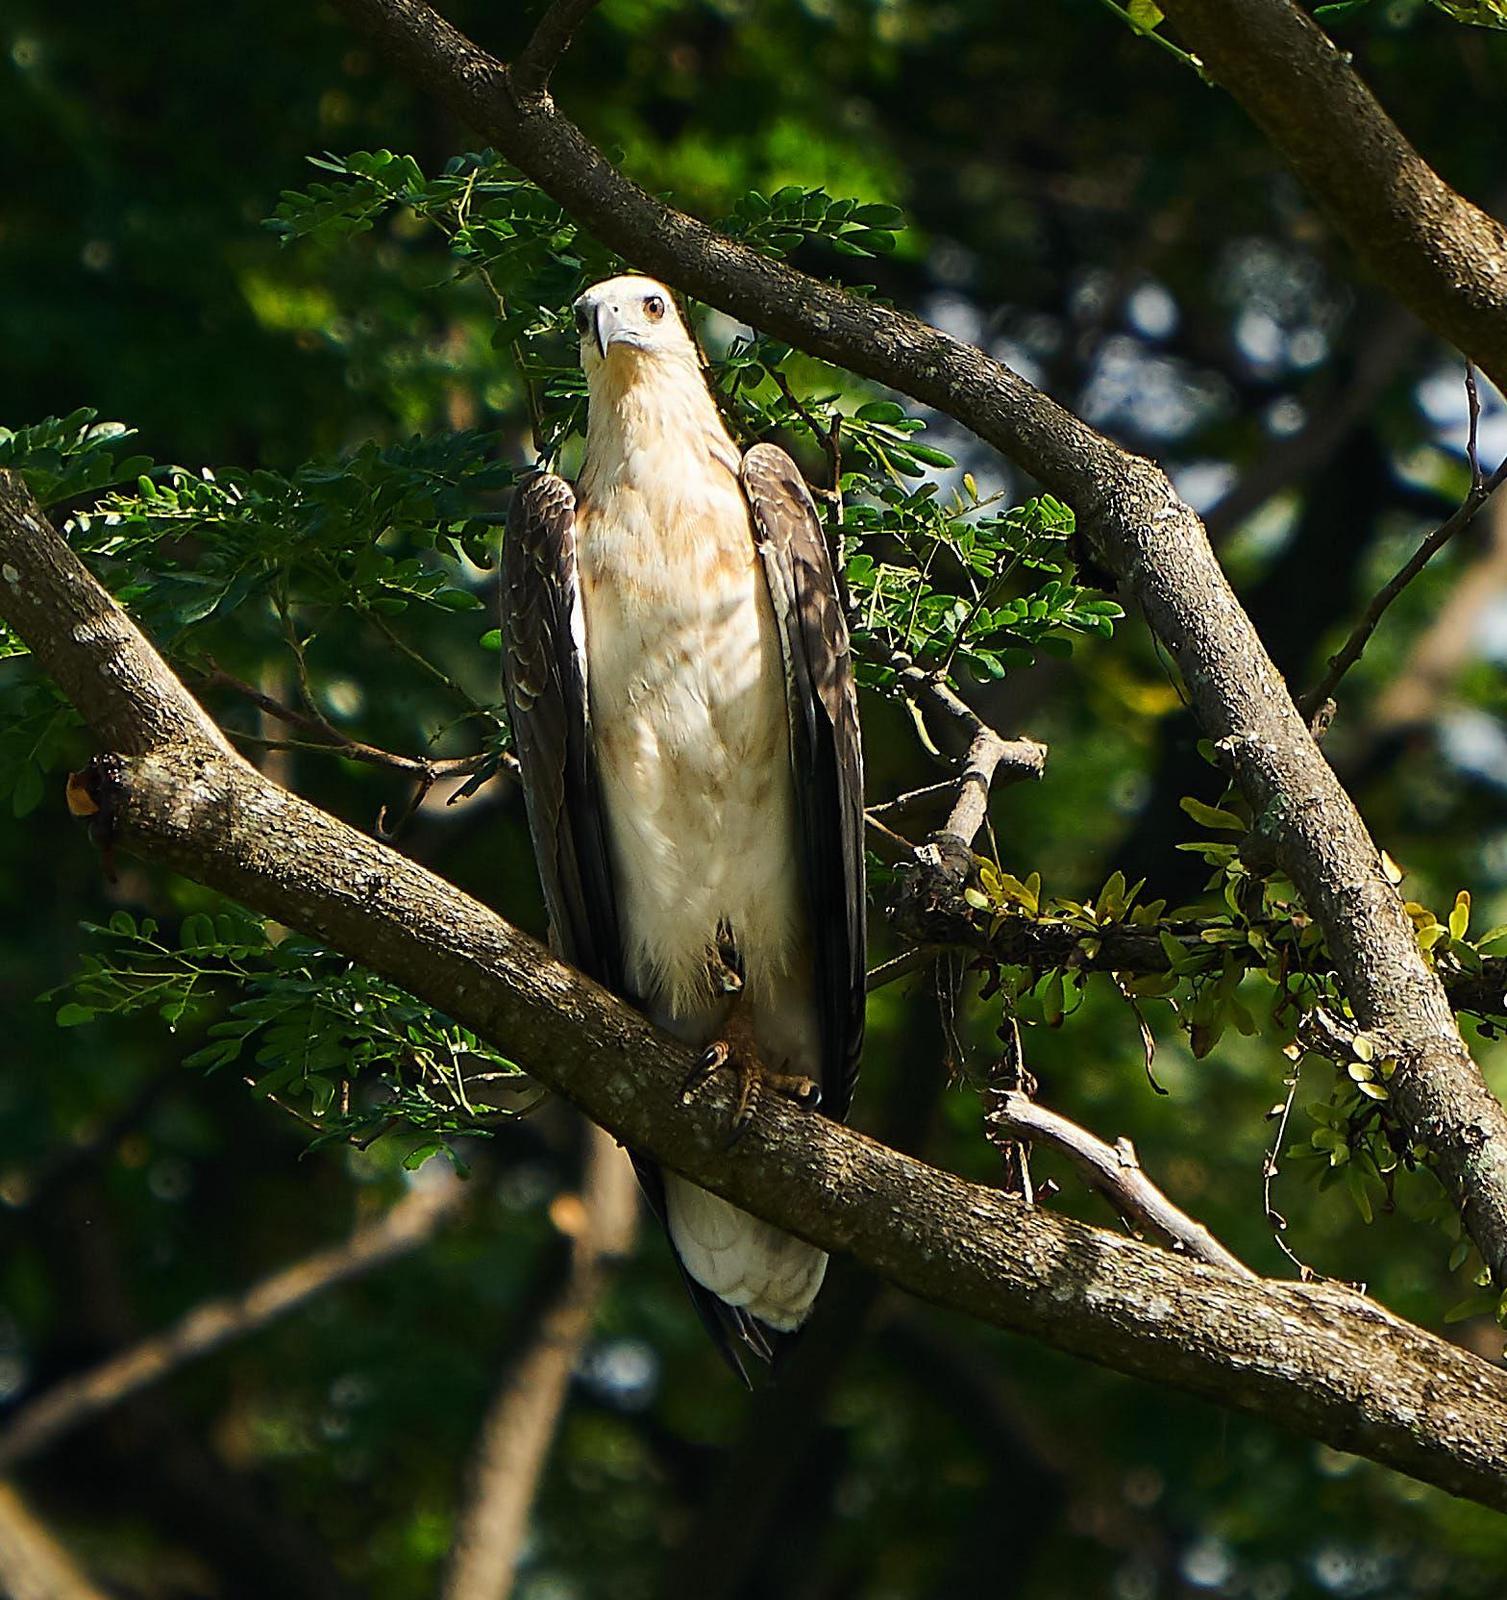 White-bellied Sea-Eagle Photo by Steven Cheong